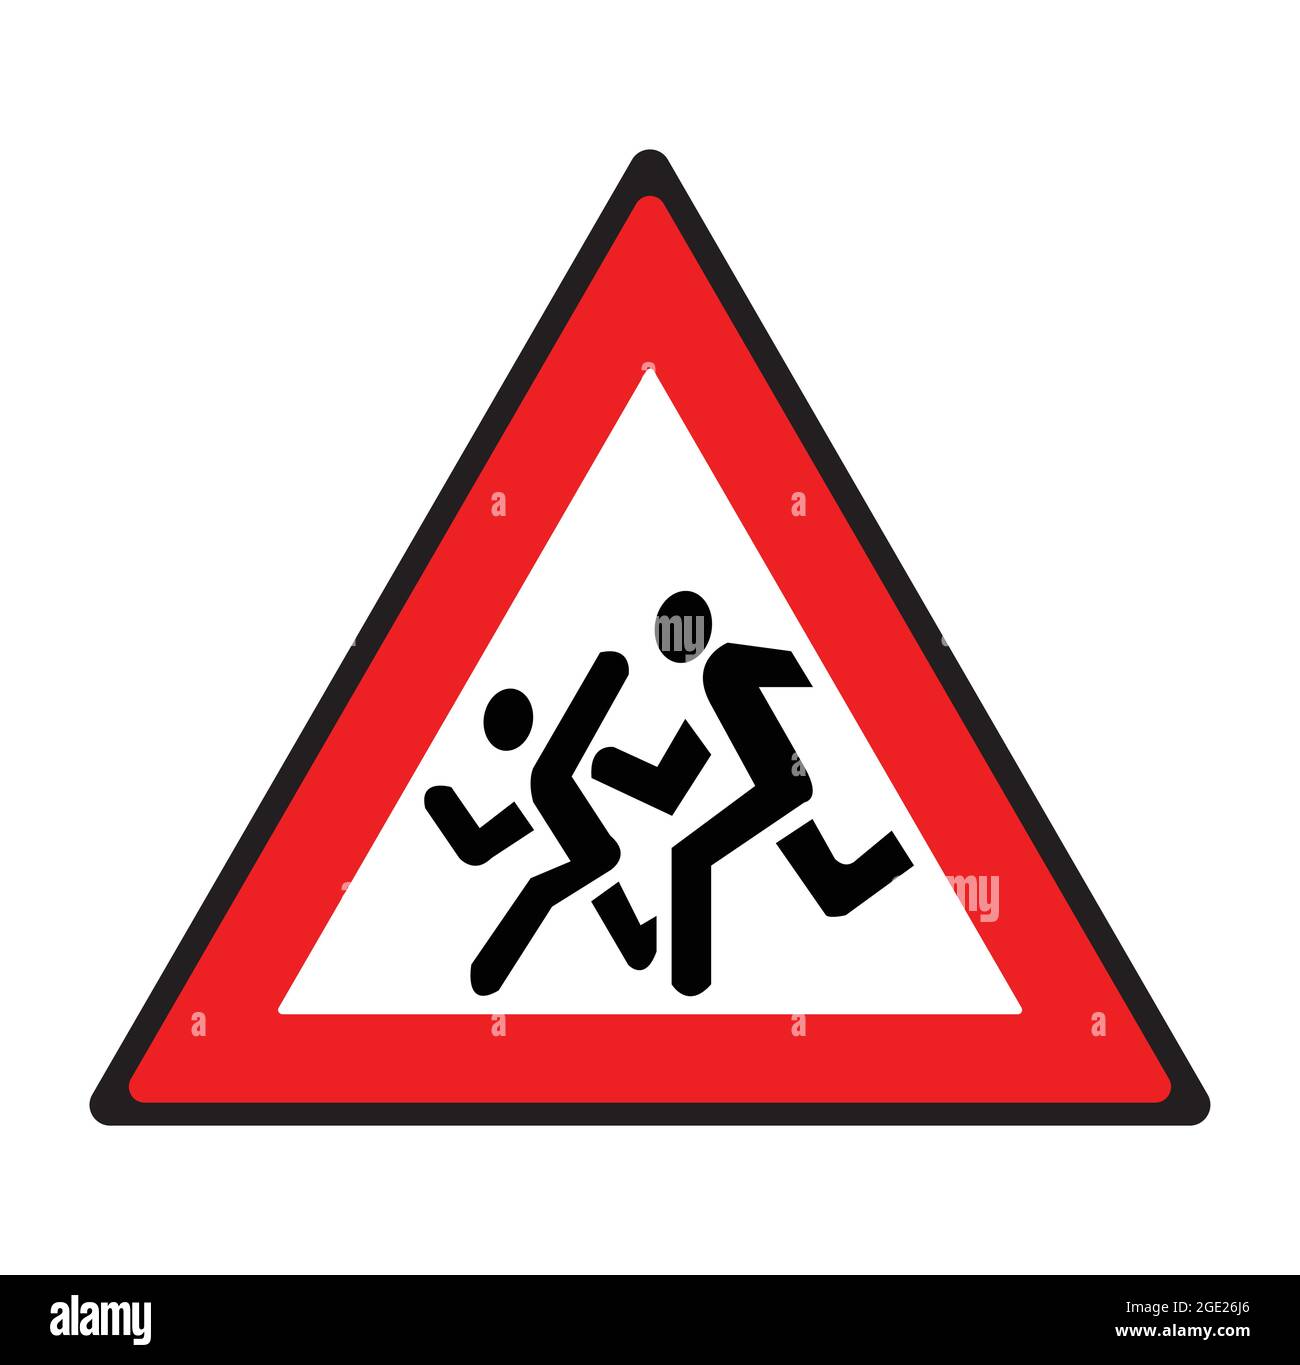 Children passing by road sign. Safety symbol. Stock Vector